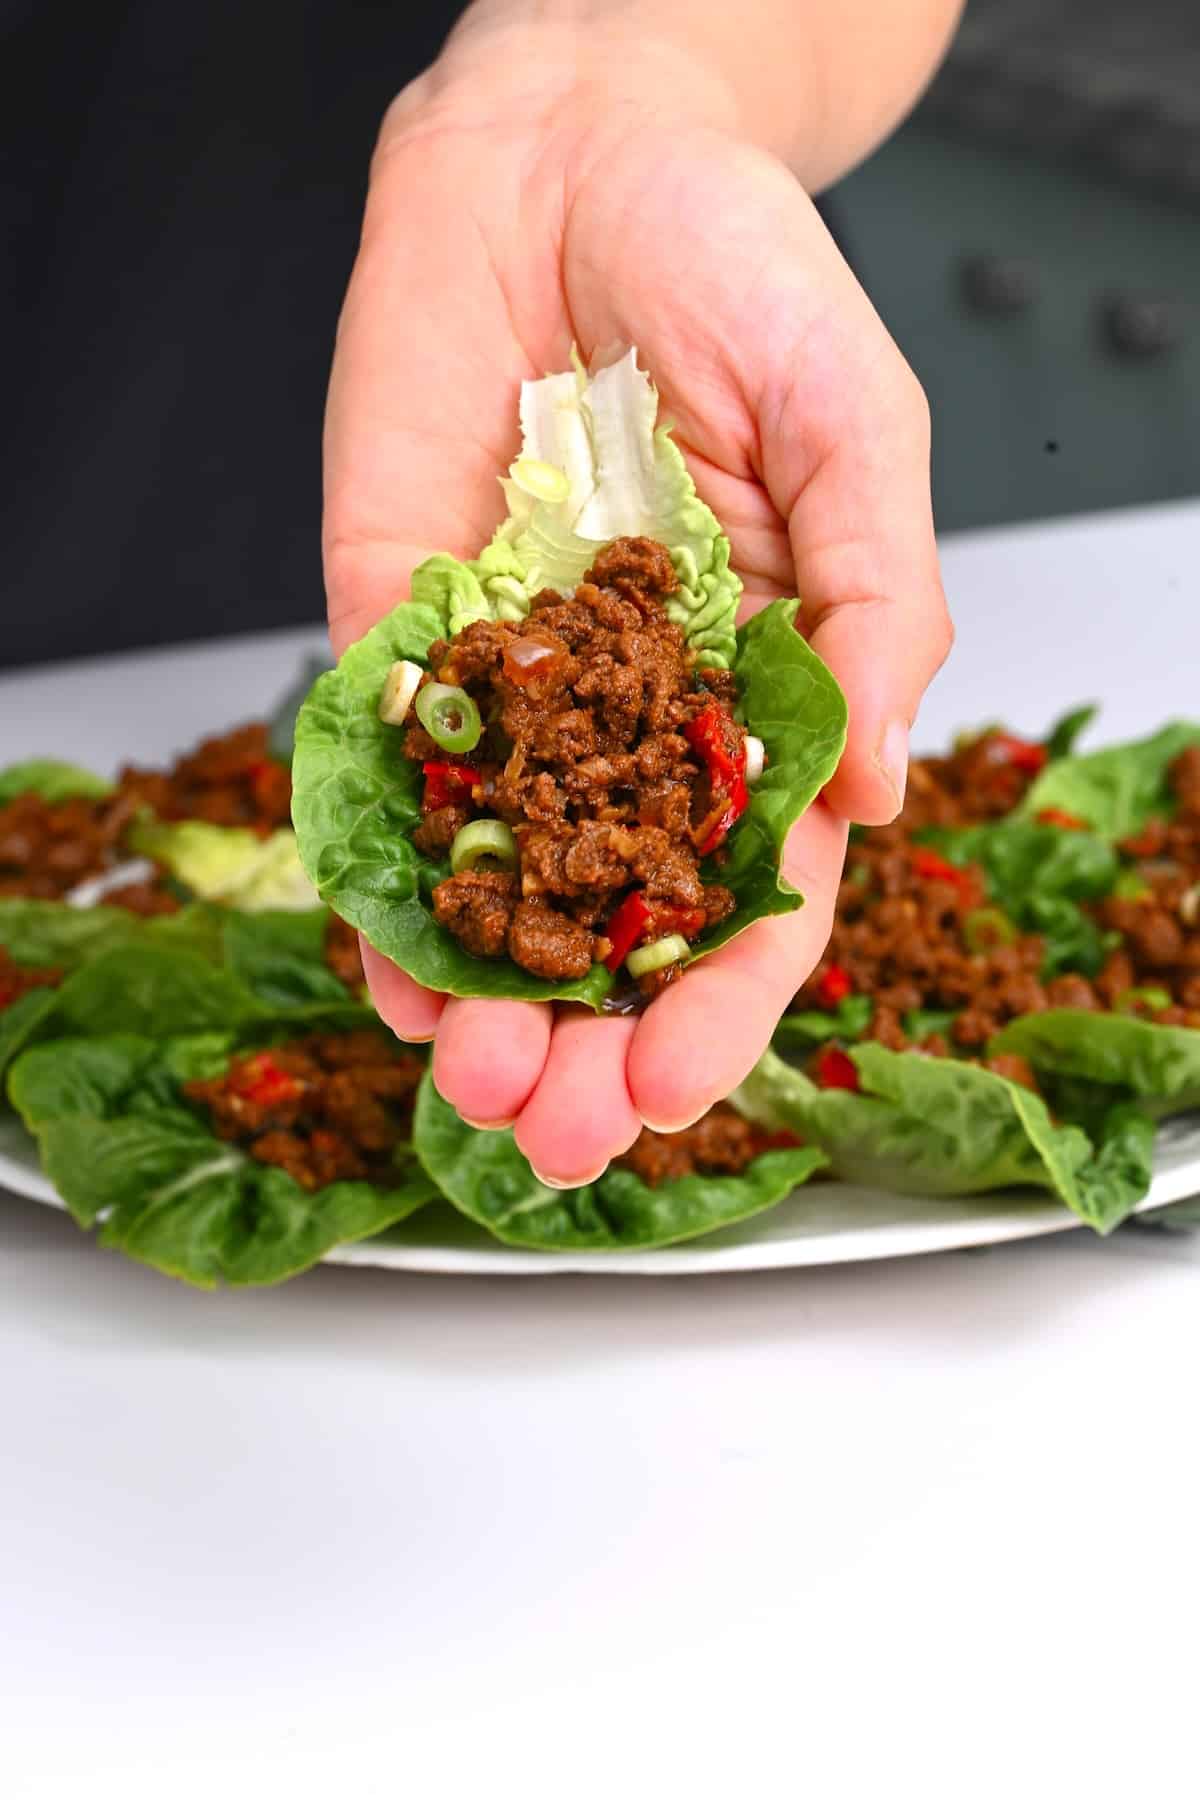 A lettuce wrap with meat filling